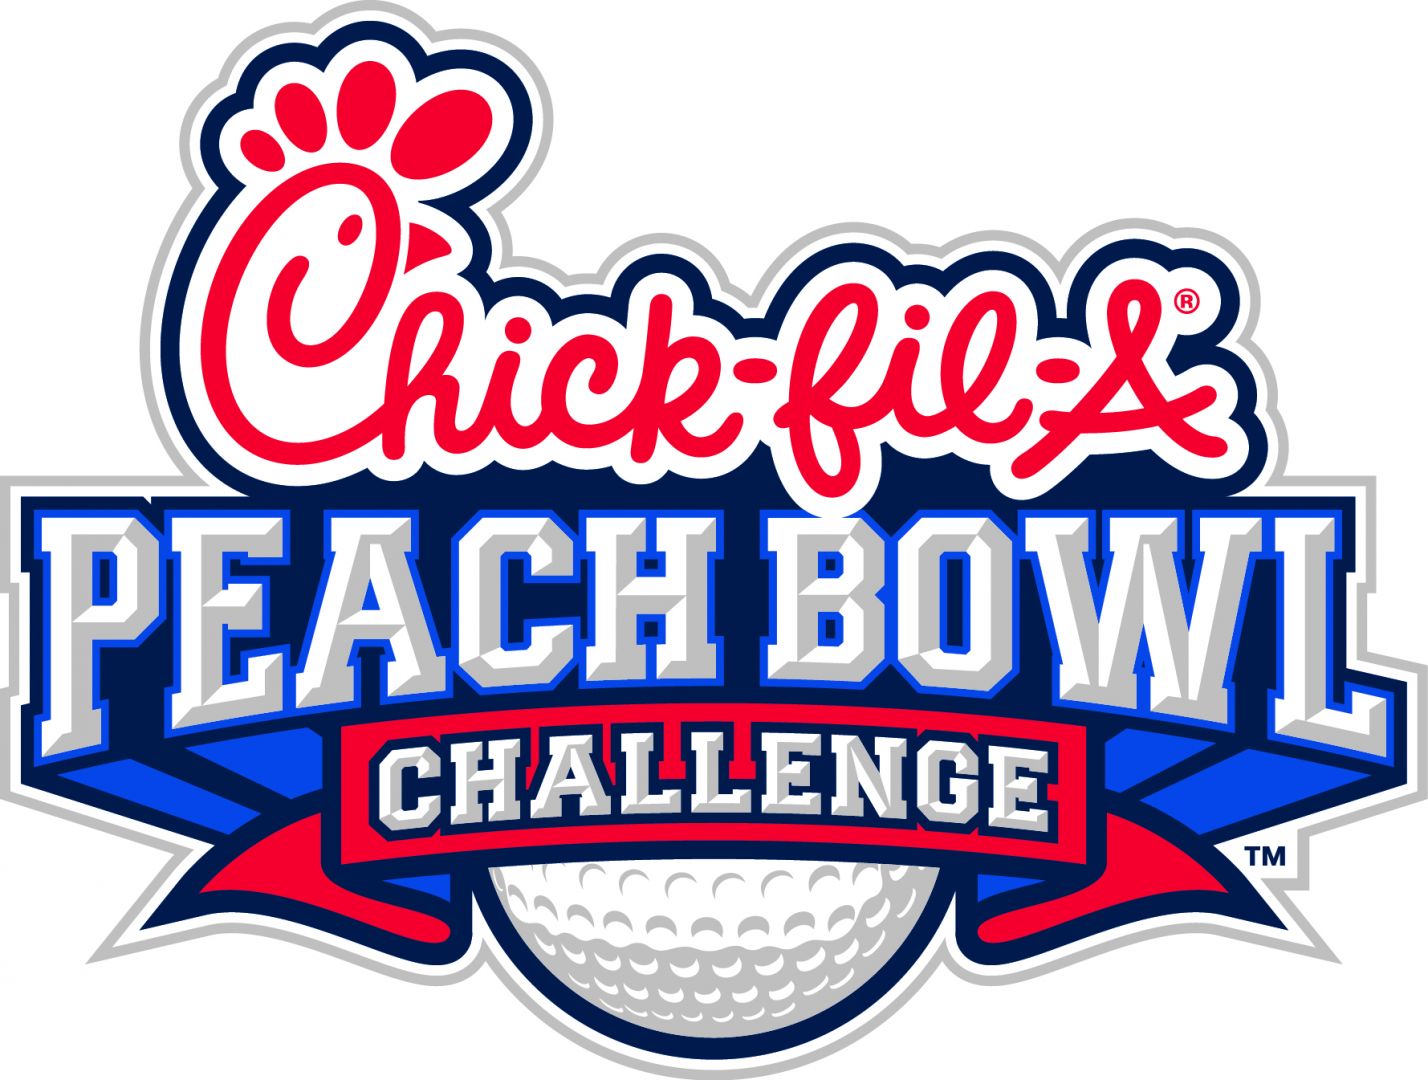 Brian Kelly and Jimmy Dunne to compete in 2018 Chick-fil-A Peach Bowl Challenge